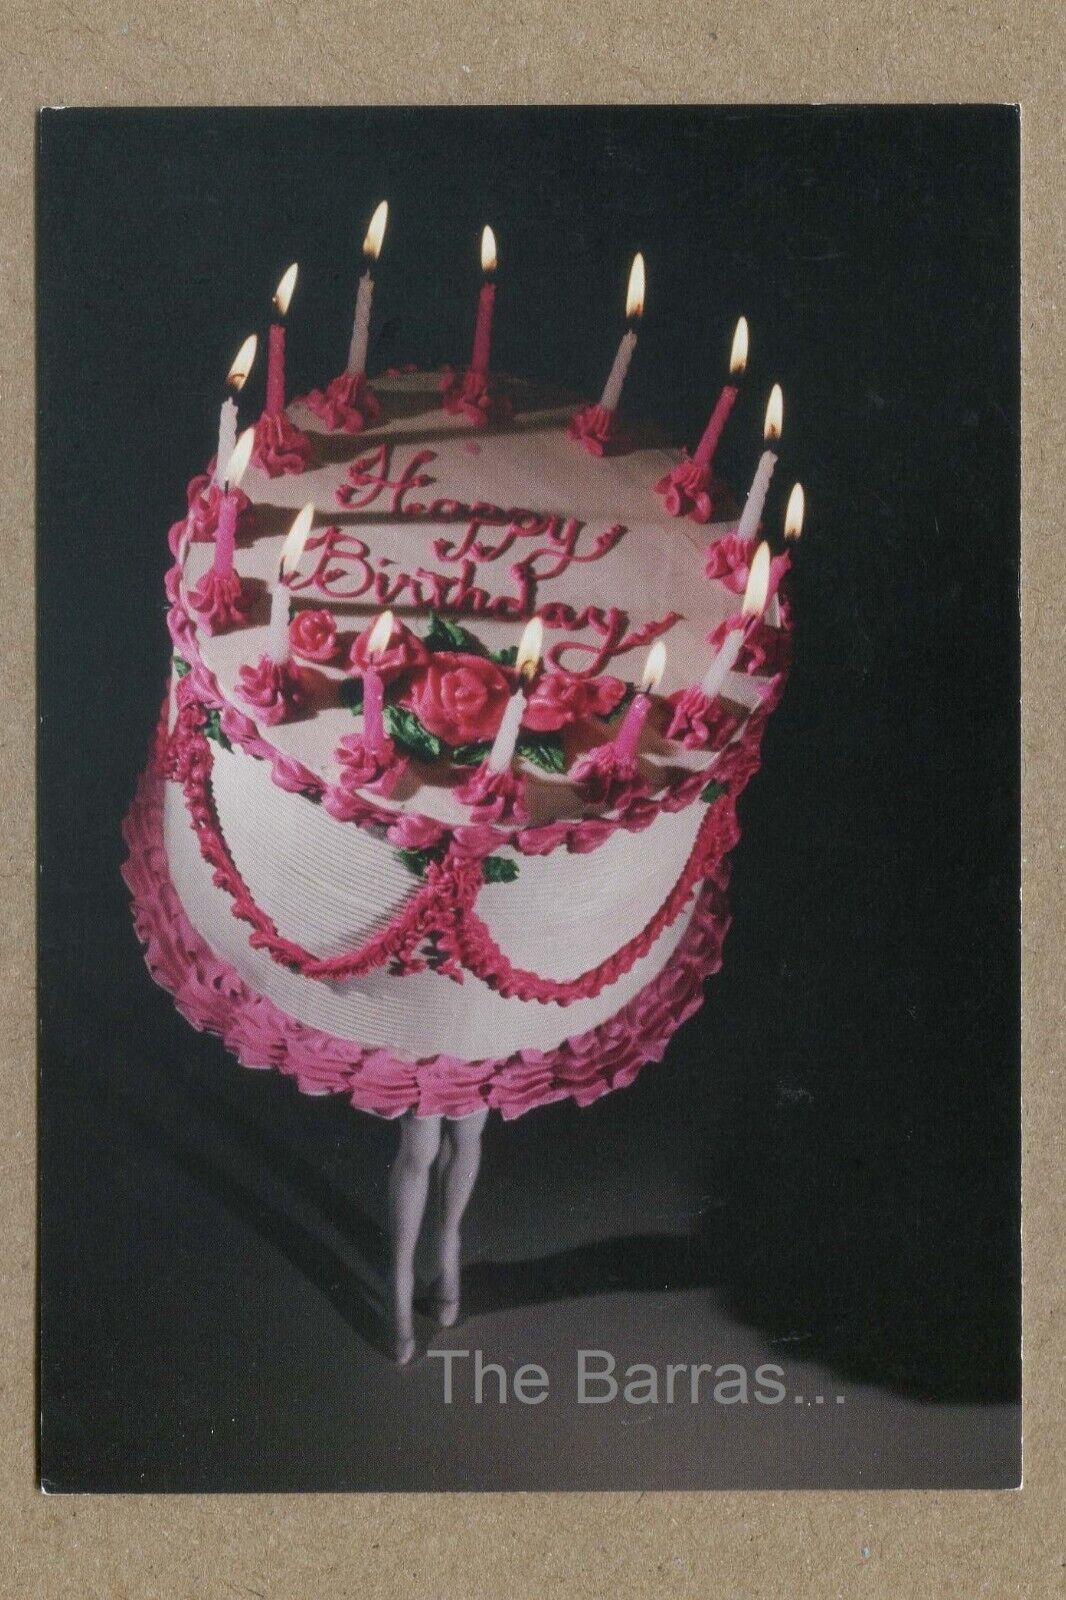 WALKING CAKE, 1989. Photo by Laurie Simmons FOTOFOLIO POSTCARD